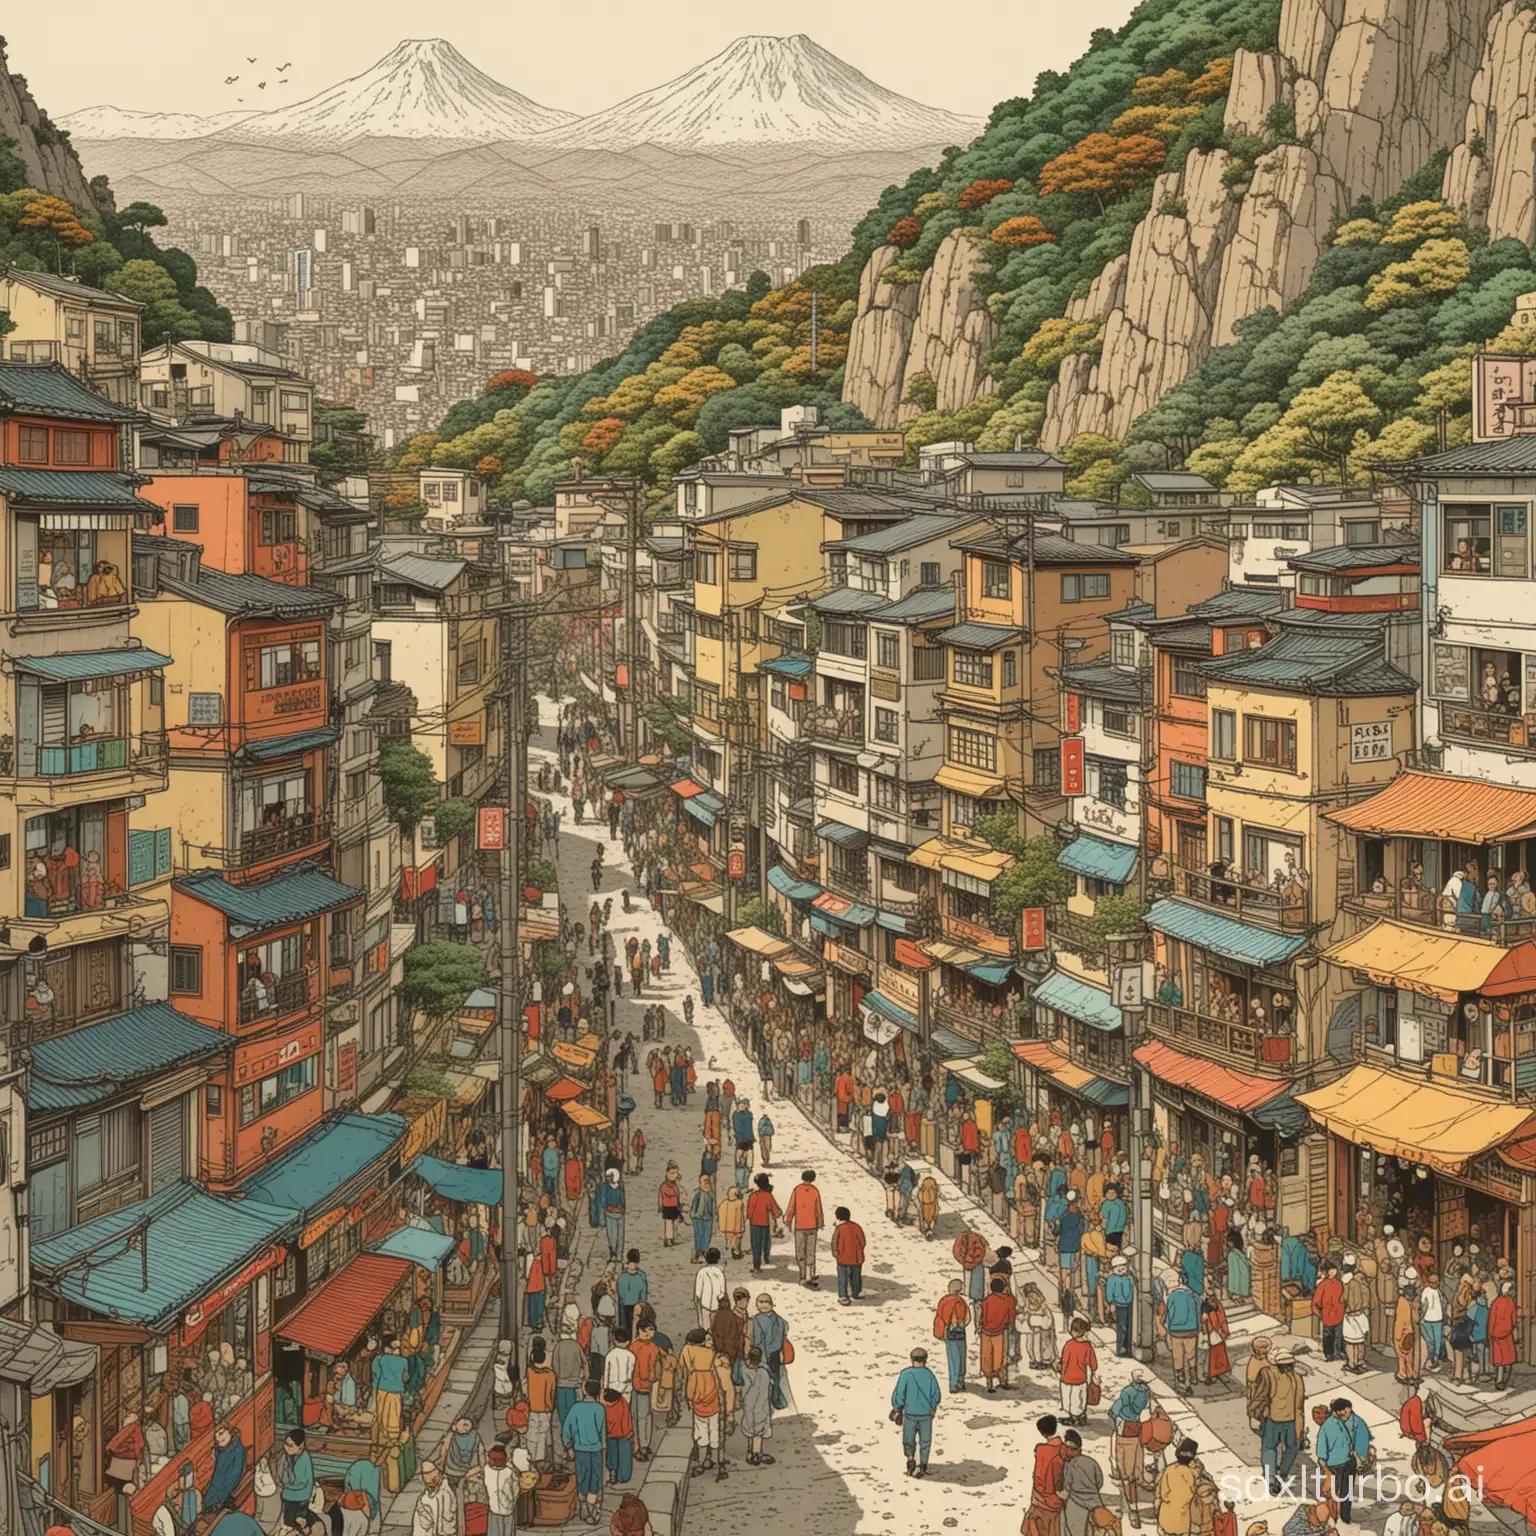 Hergé created detailed pen and ink illustrations of a Tokyo neighborhood on the side of a large mountain in the style of the Tintin comics. Vibrant colors, detailed, many people, sunny day, many people, intricate details